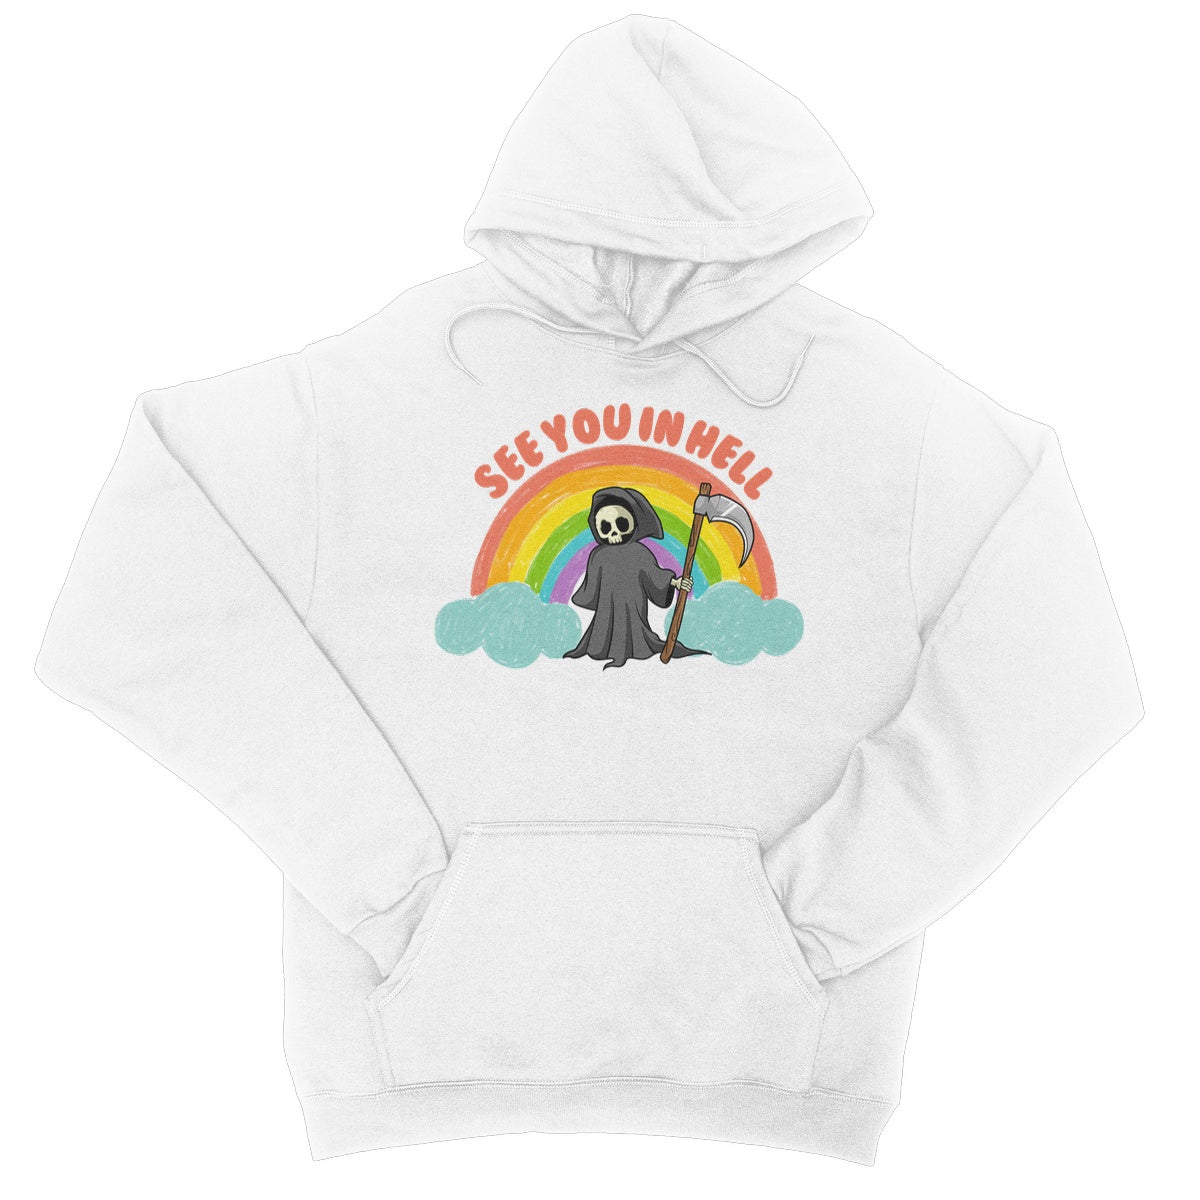 see you in hell hoodie white